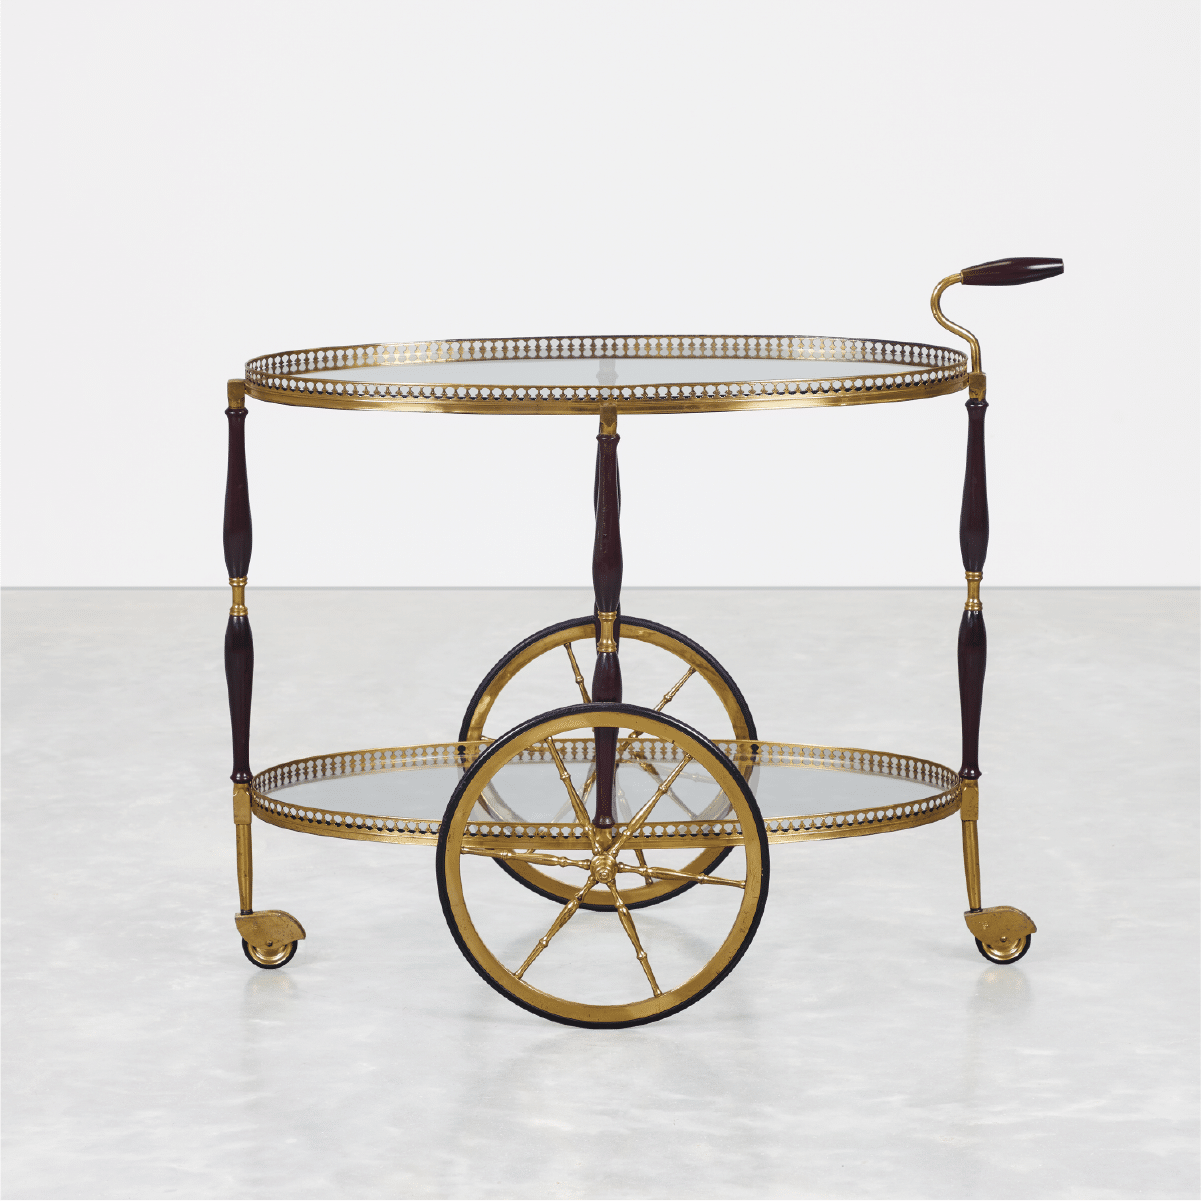 Low res for web_Neoclassical Tea Cart_CoupXX